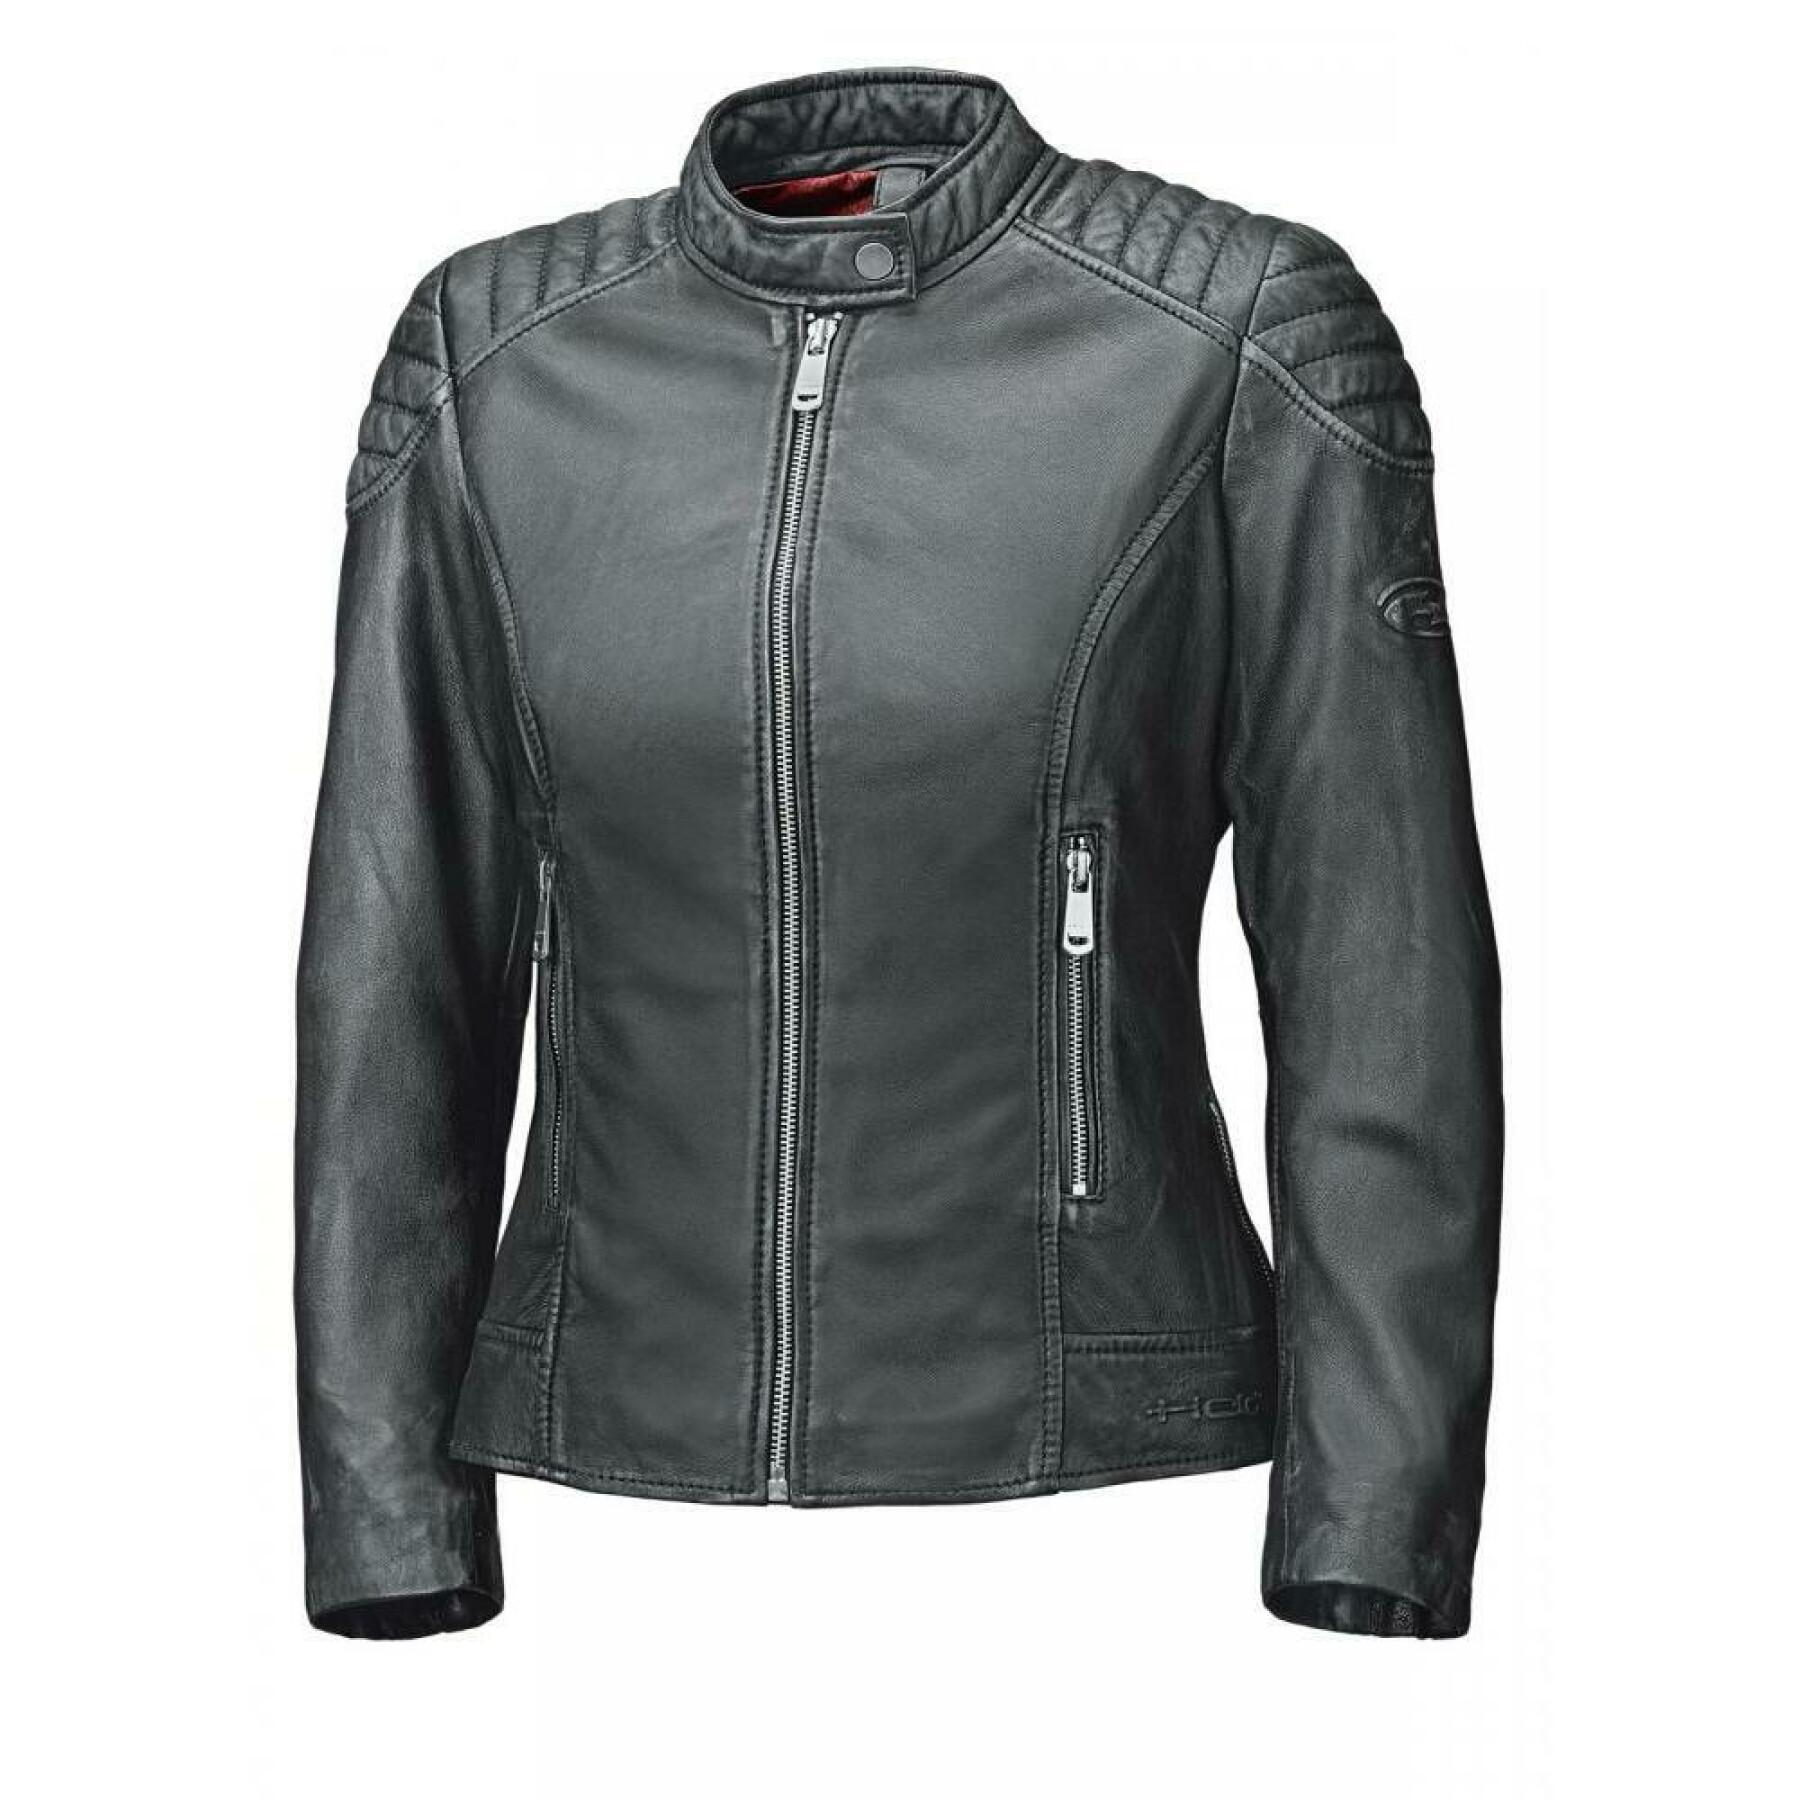 Leather jacket for women Held sally